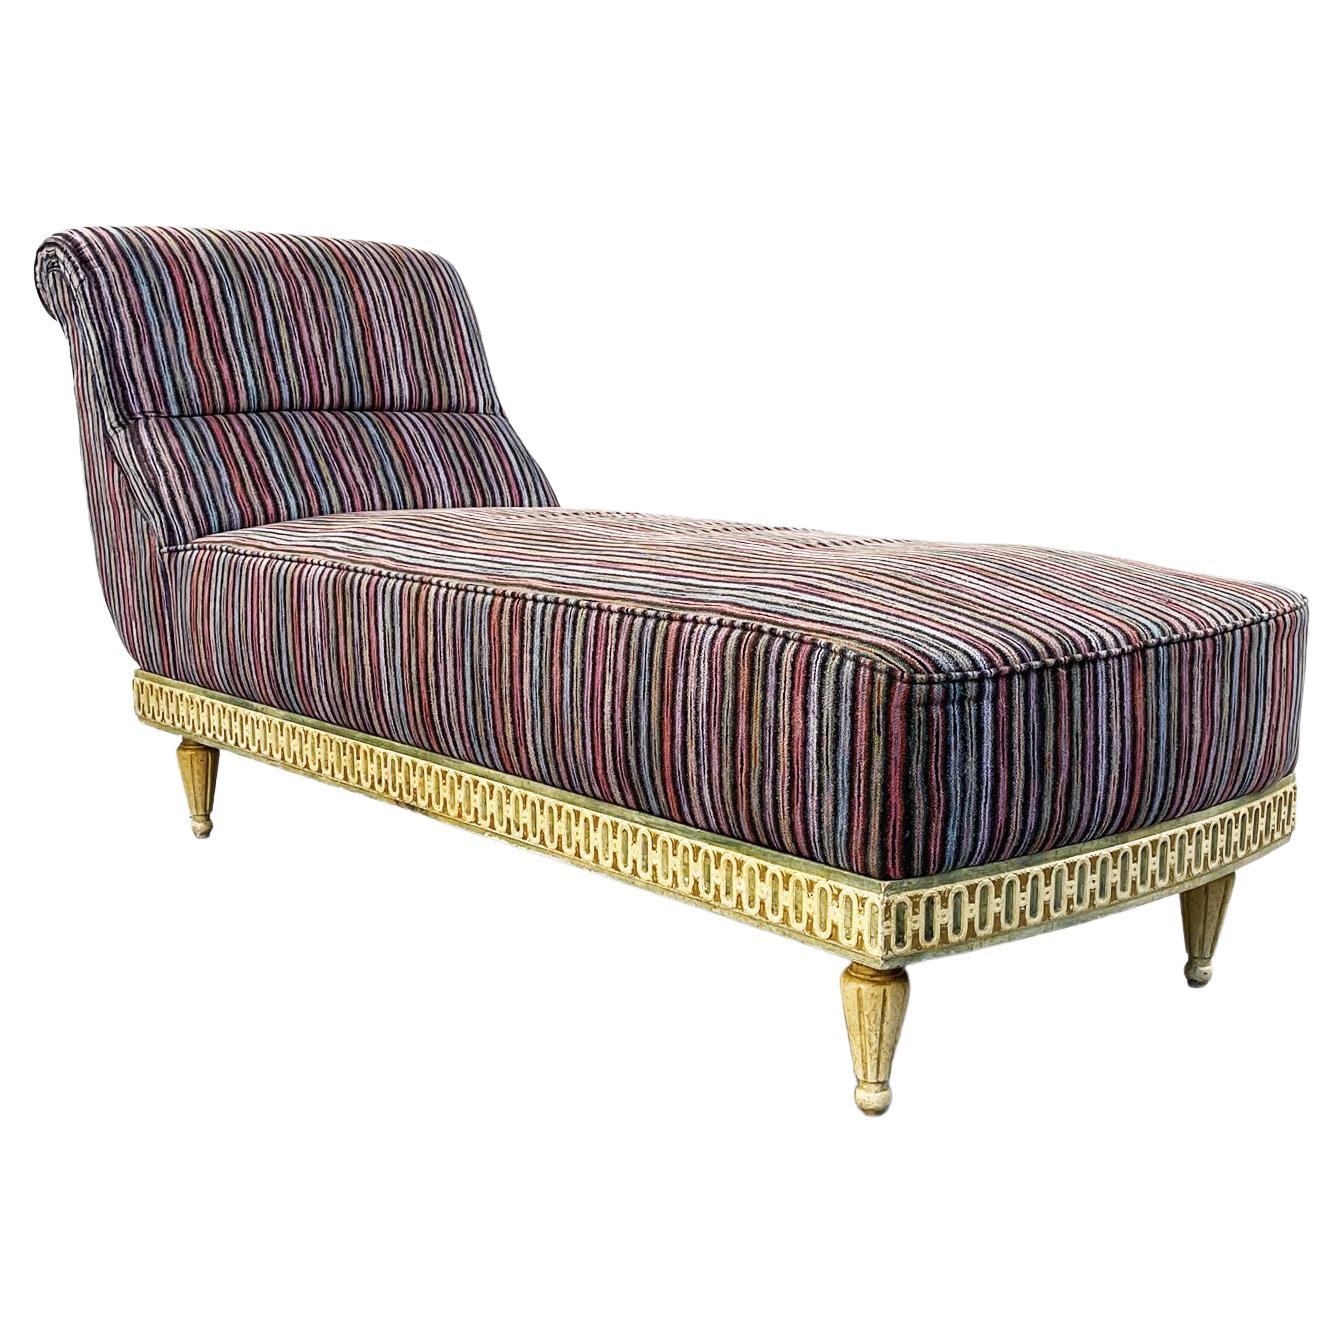 Italian Midcentury Venetian Style Chaise Longue with Missoni Striped Fabric, 1950 For Sale